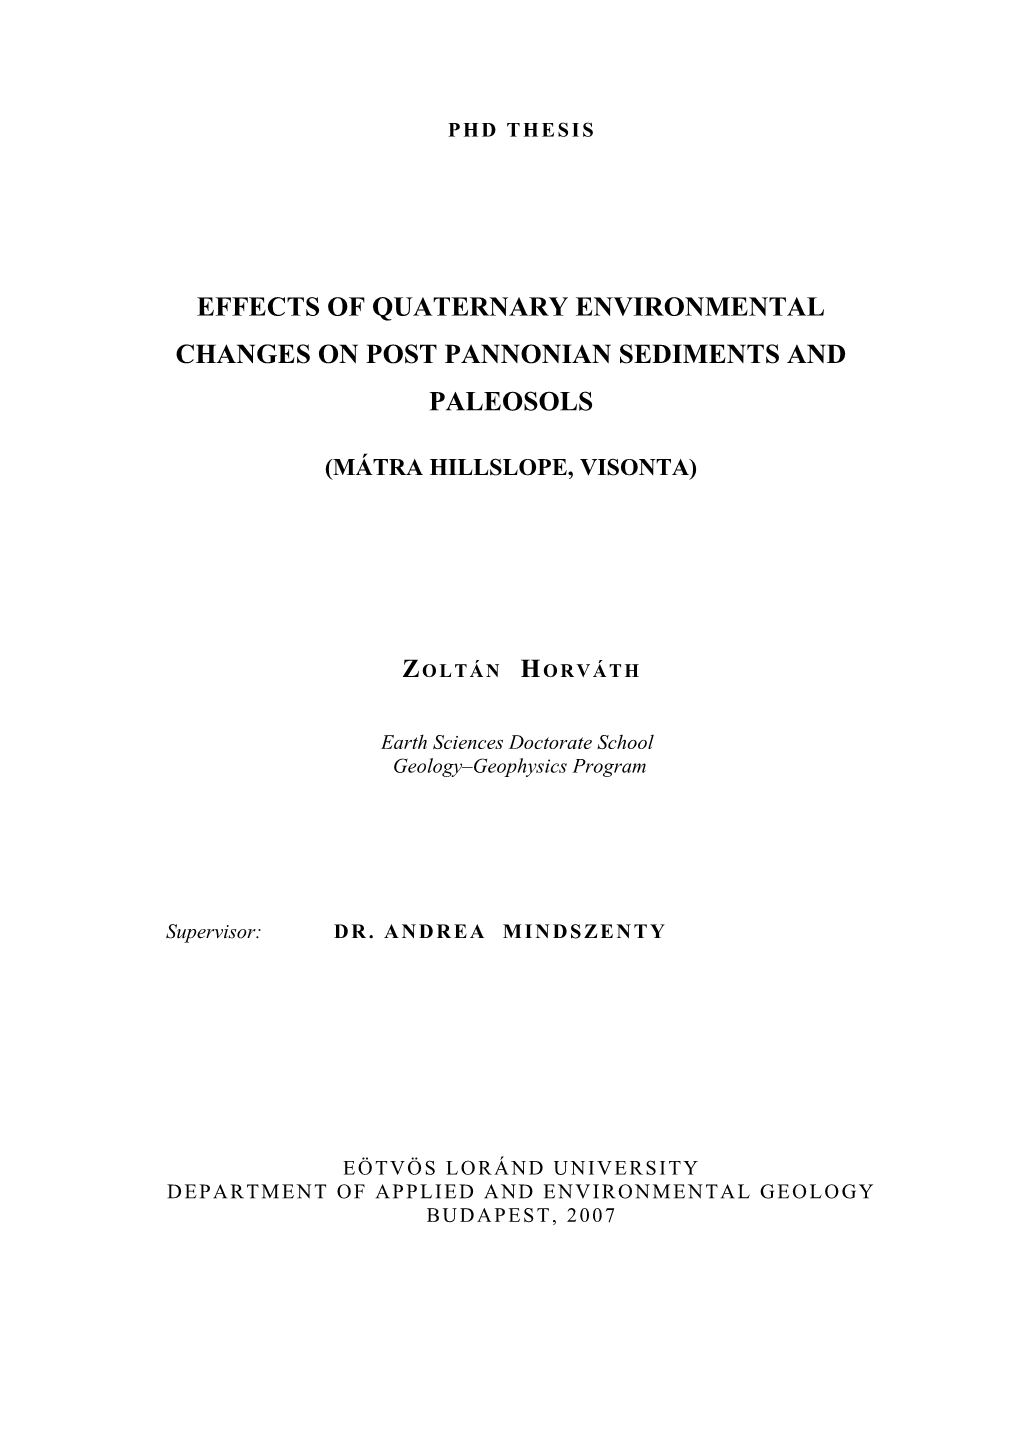 Effects of Quaternary Environmental Changes on Post Pannonian Sediments and Paleosols